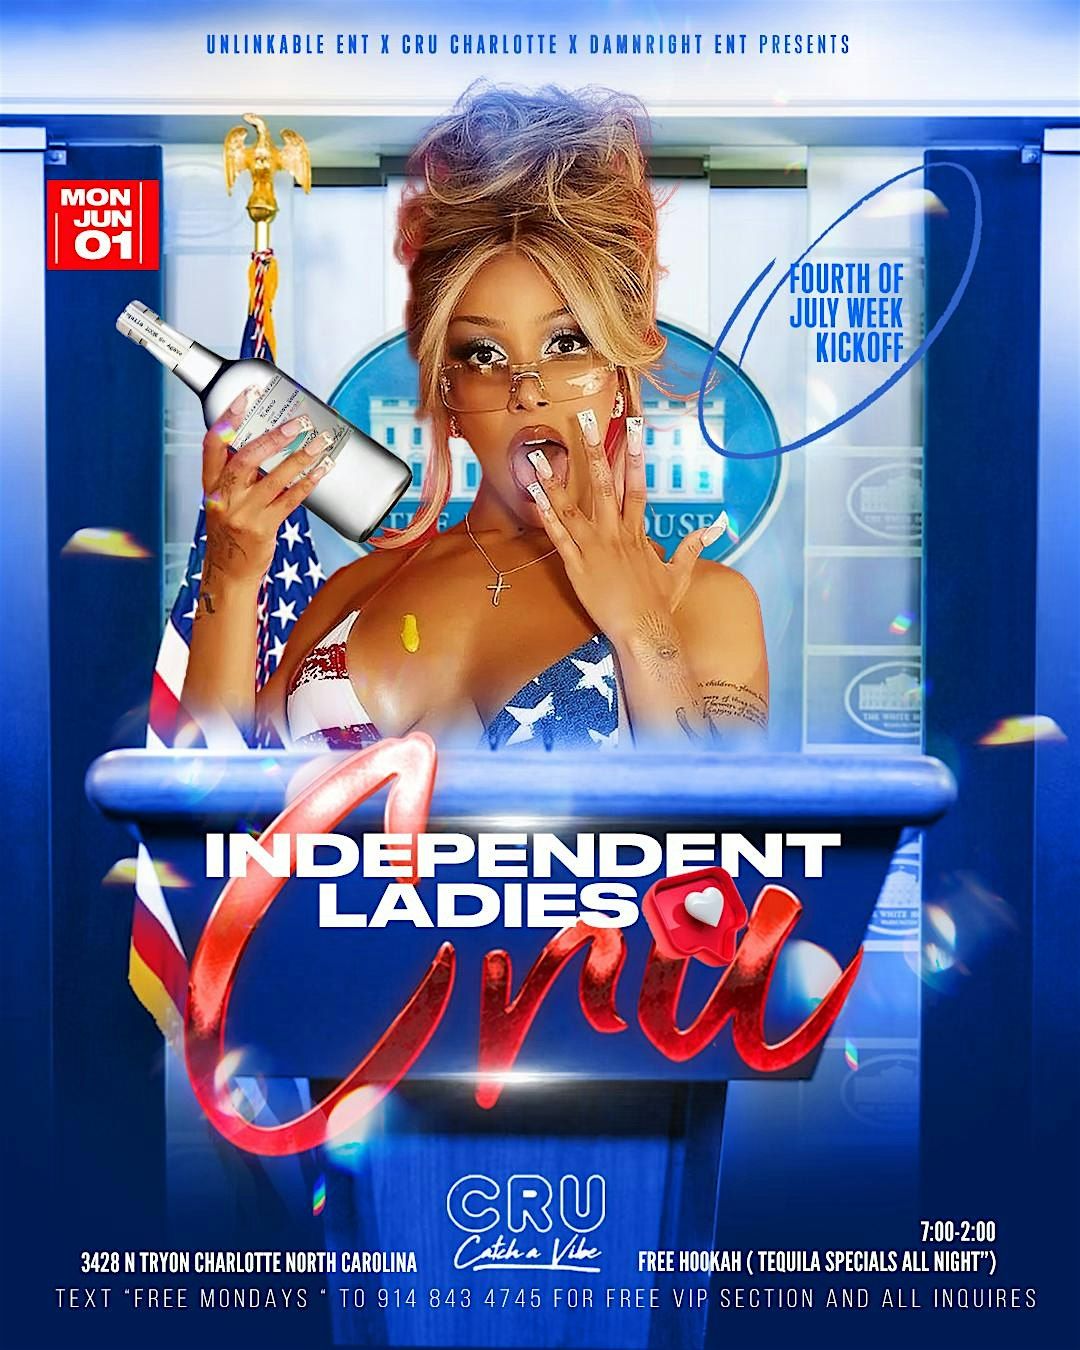 Independent ladies love cru! 4th of July week kick off! $150 bottles all night! Free vip tables avai